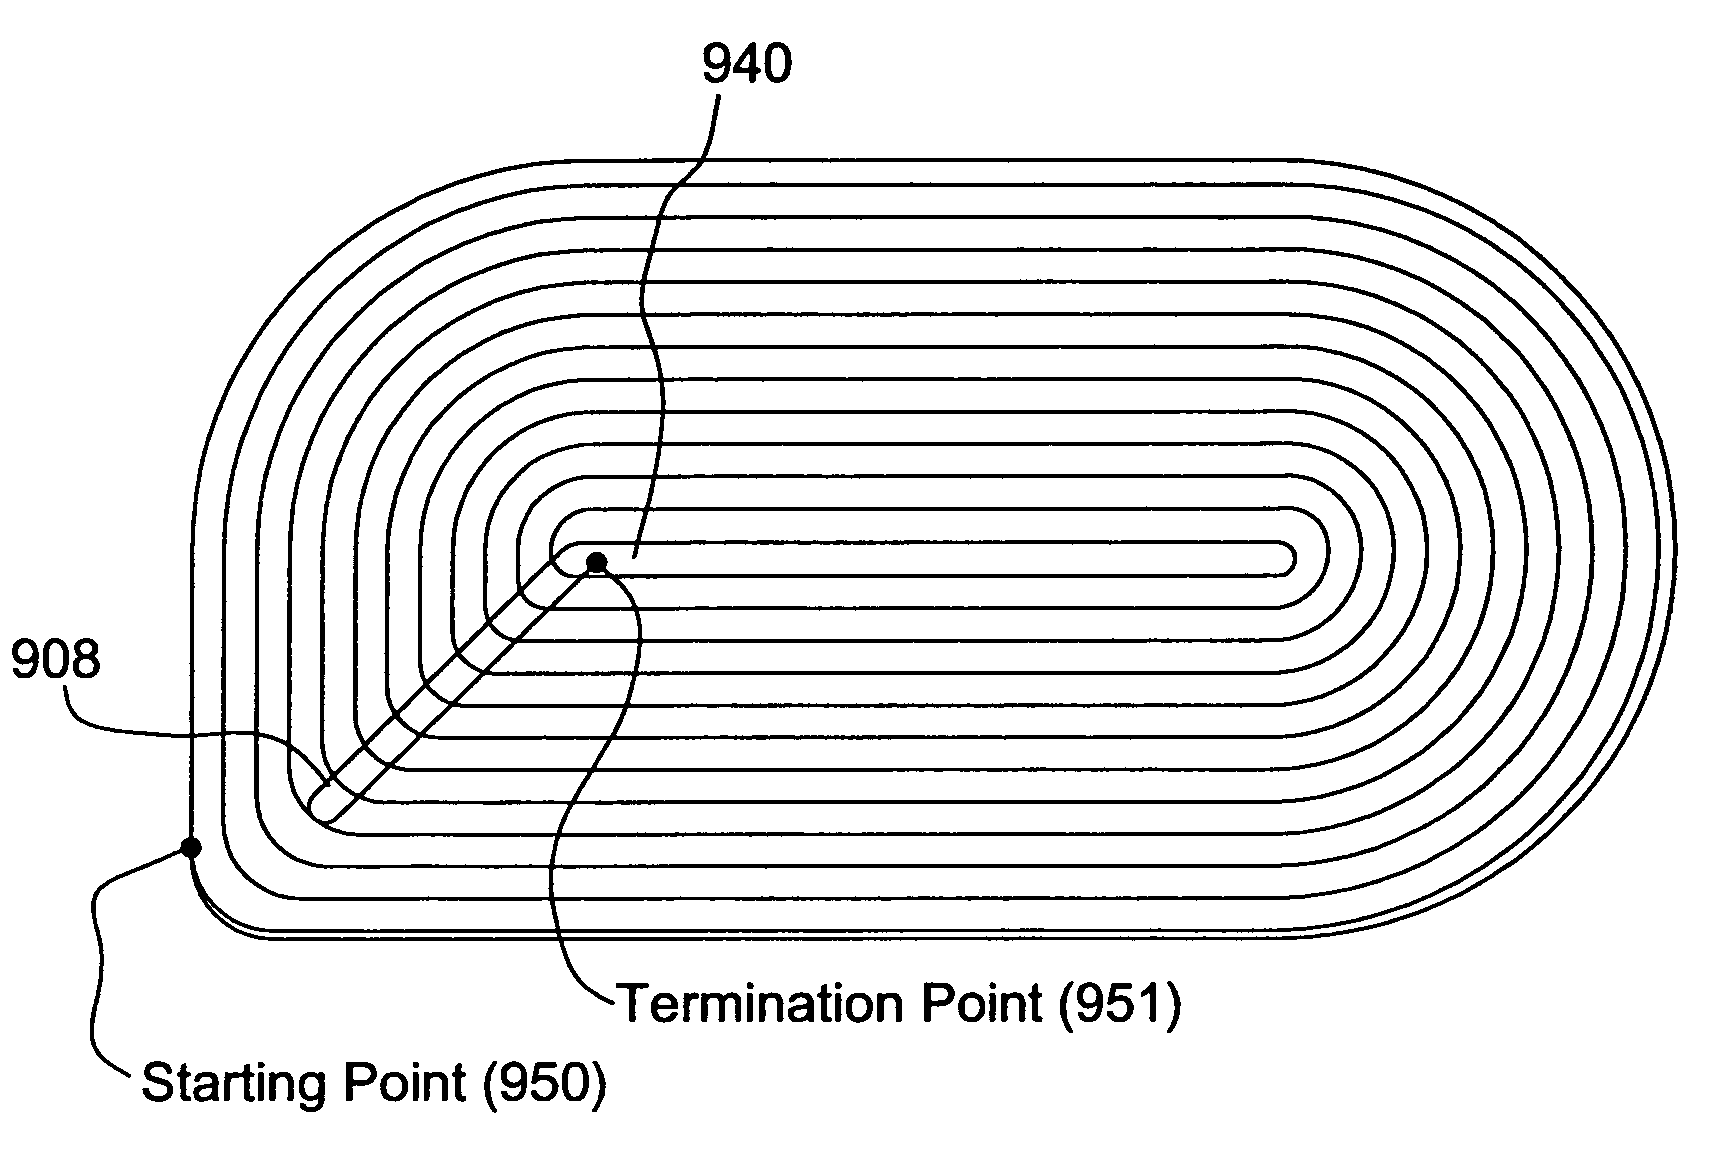 Path planner and method for planning a path plan having a spiral component